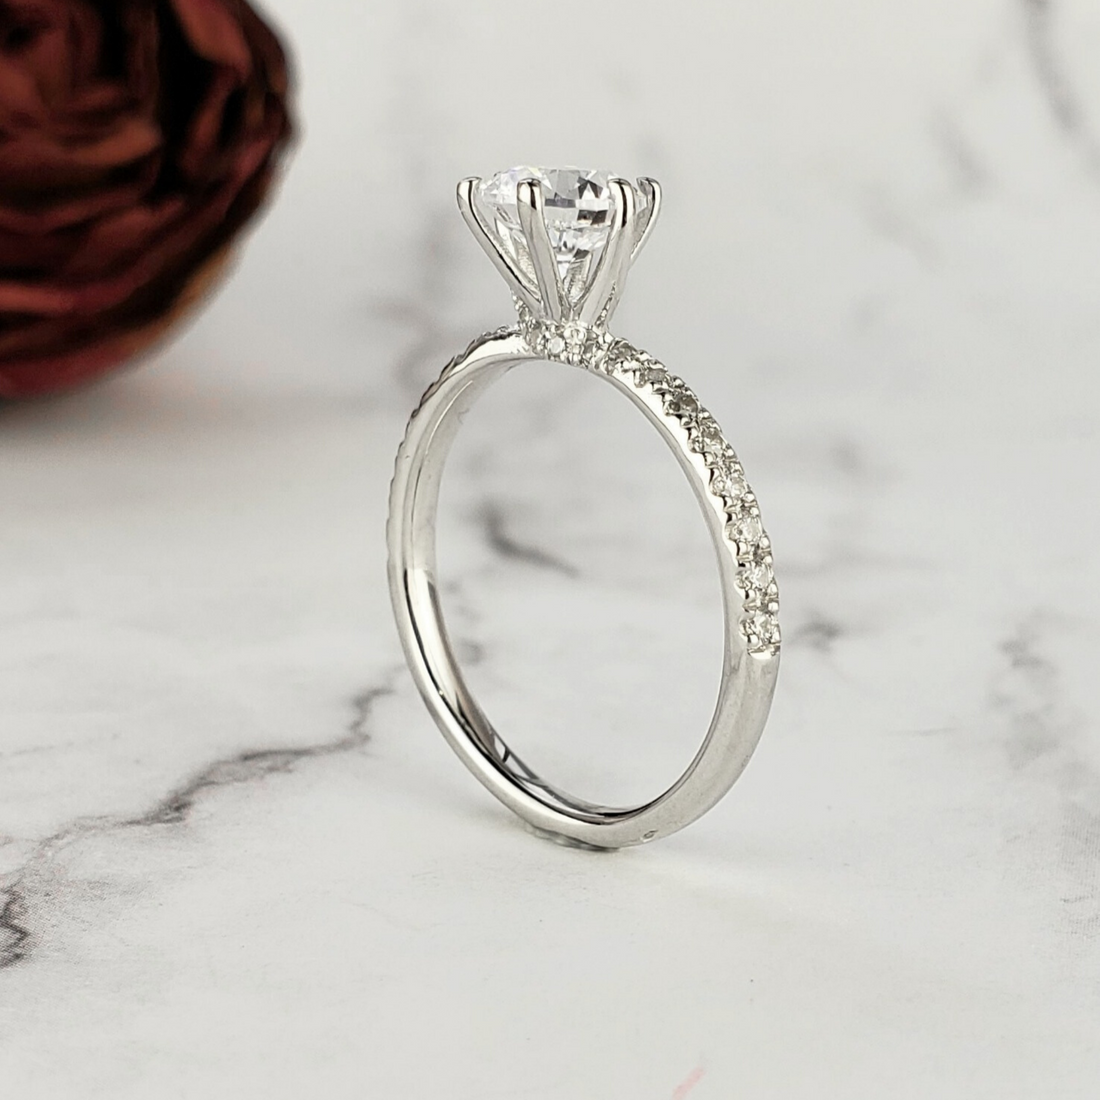 Redesign Your Old Engagement Ring